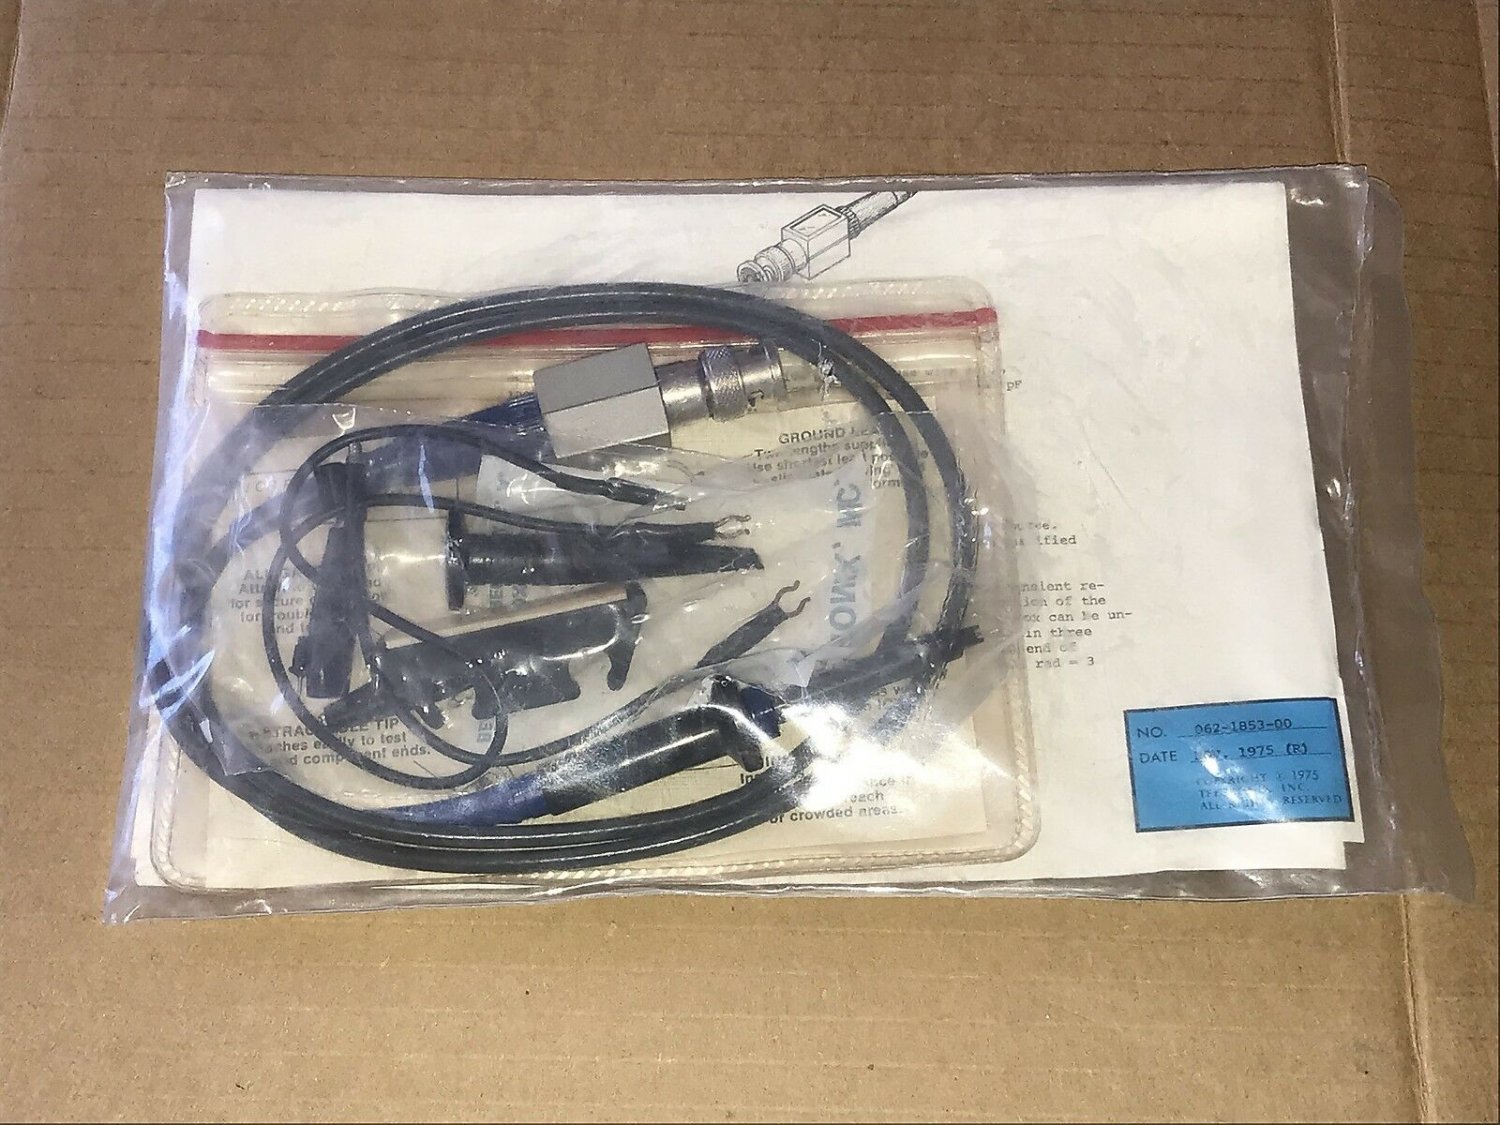 New TEKTRONIX P6108 10X Passive Probe 100 MHz - Sealed in Package